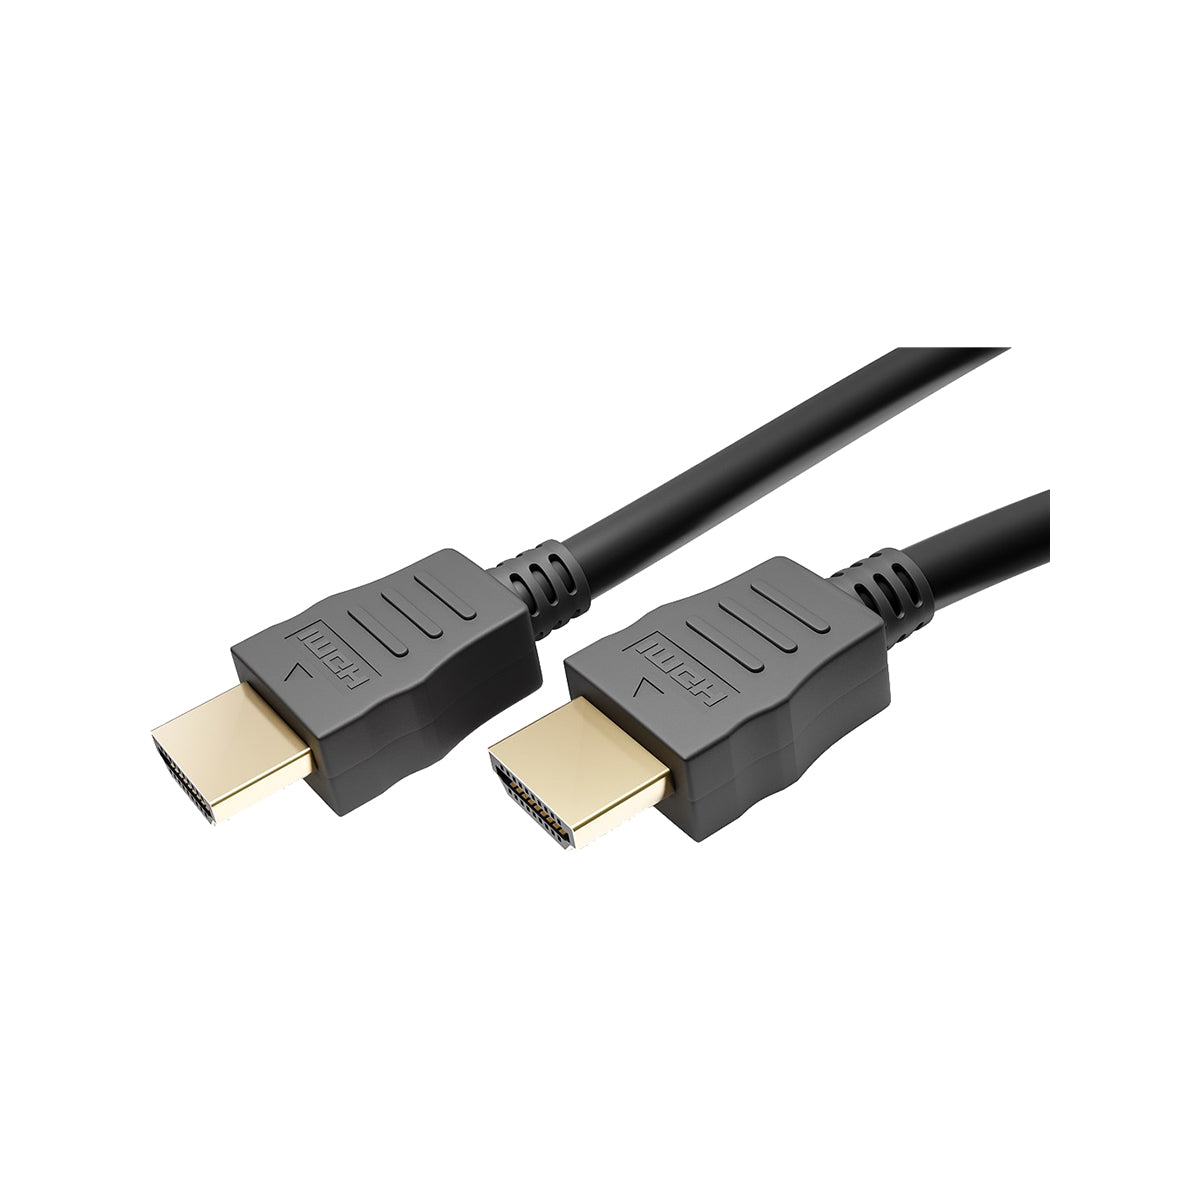 Goobay High Speed HDMI™ Cable with Ethernet (4K@60Hz) 10M for Laptops